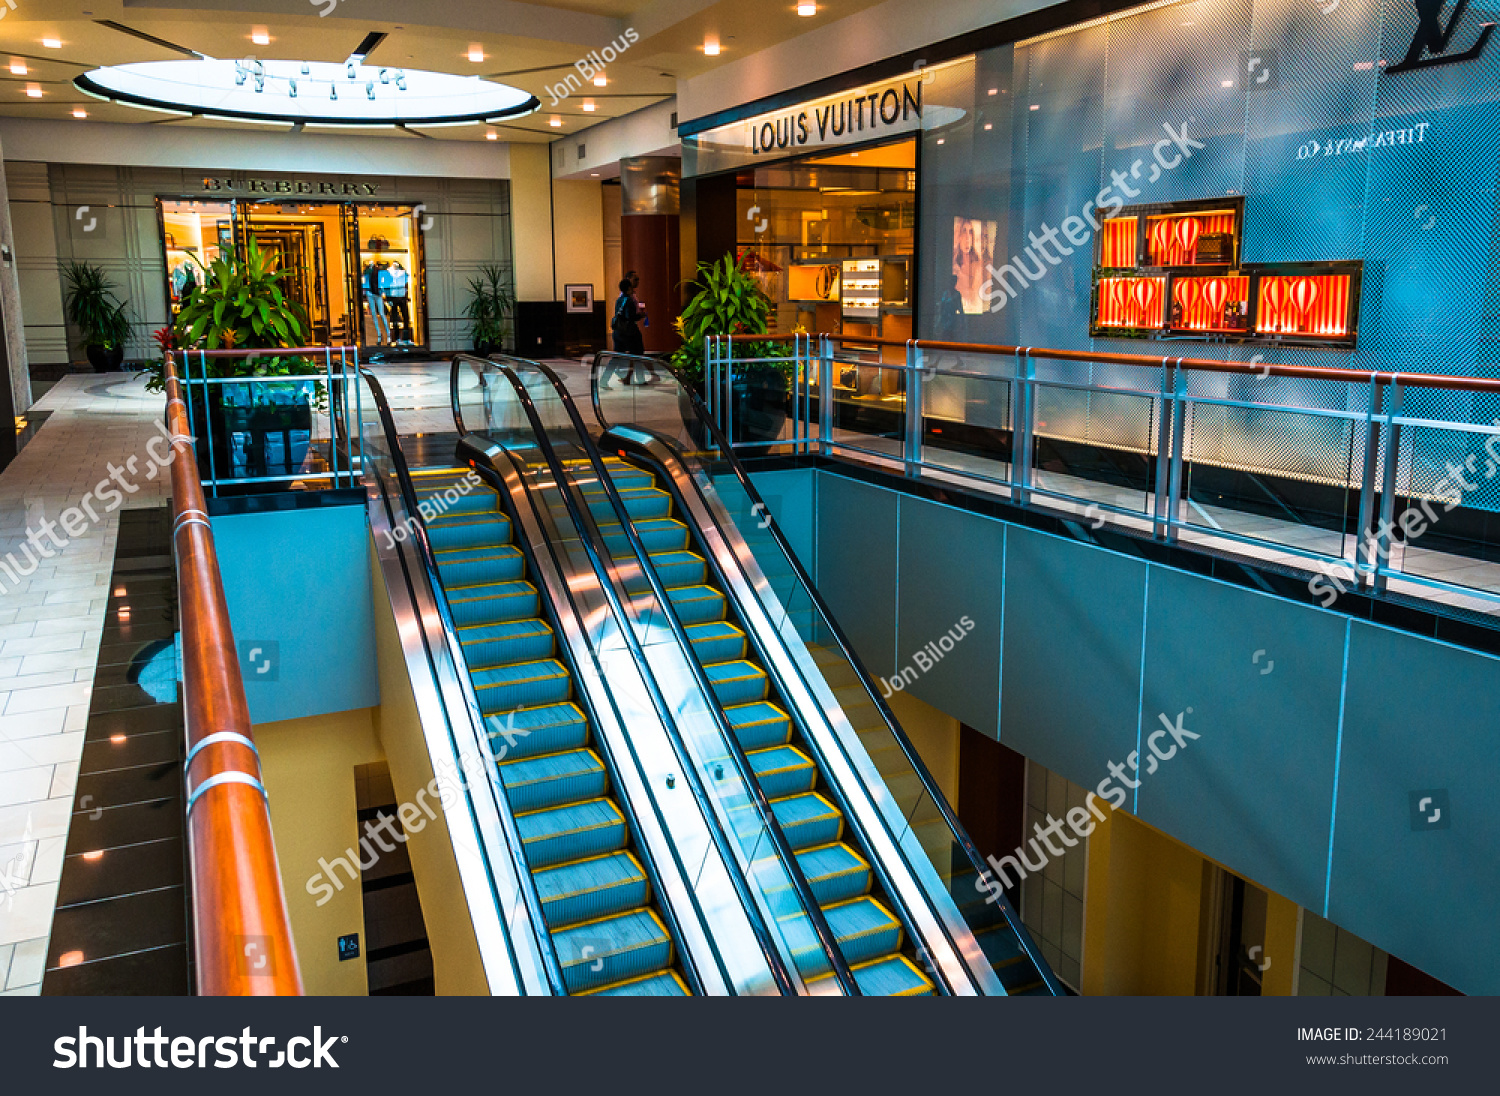 Towson, Maryland - June 1: Escalators And The Louis Vuitton Store On June 1, 2013 At Towson Town ...